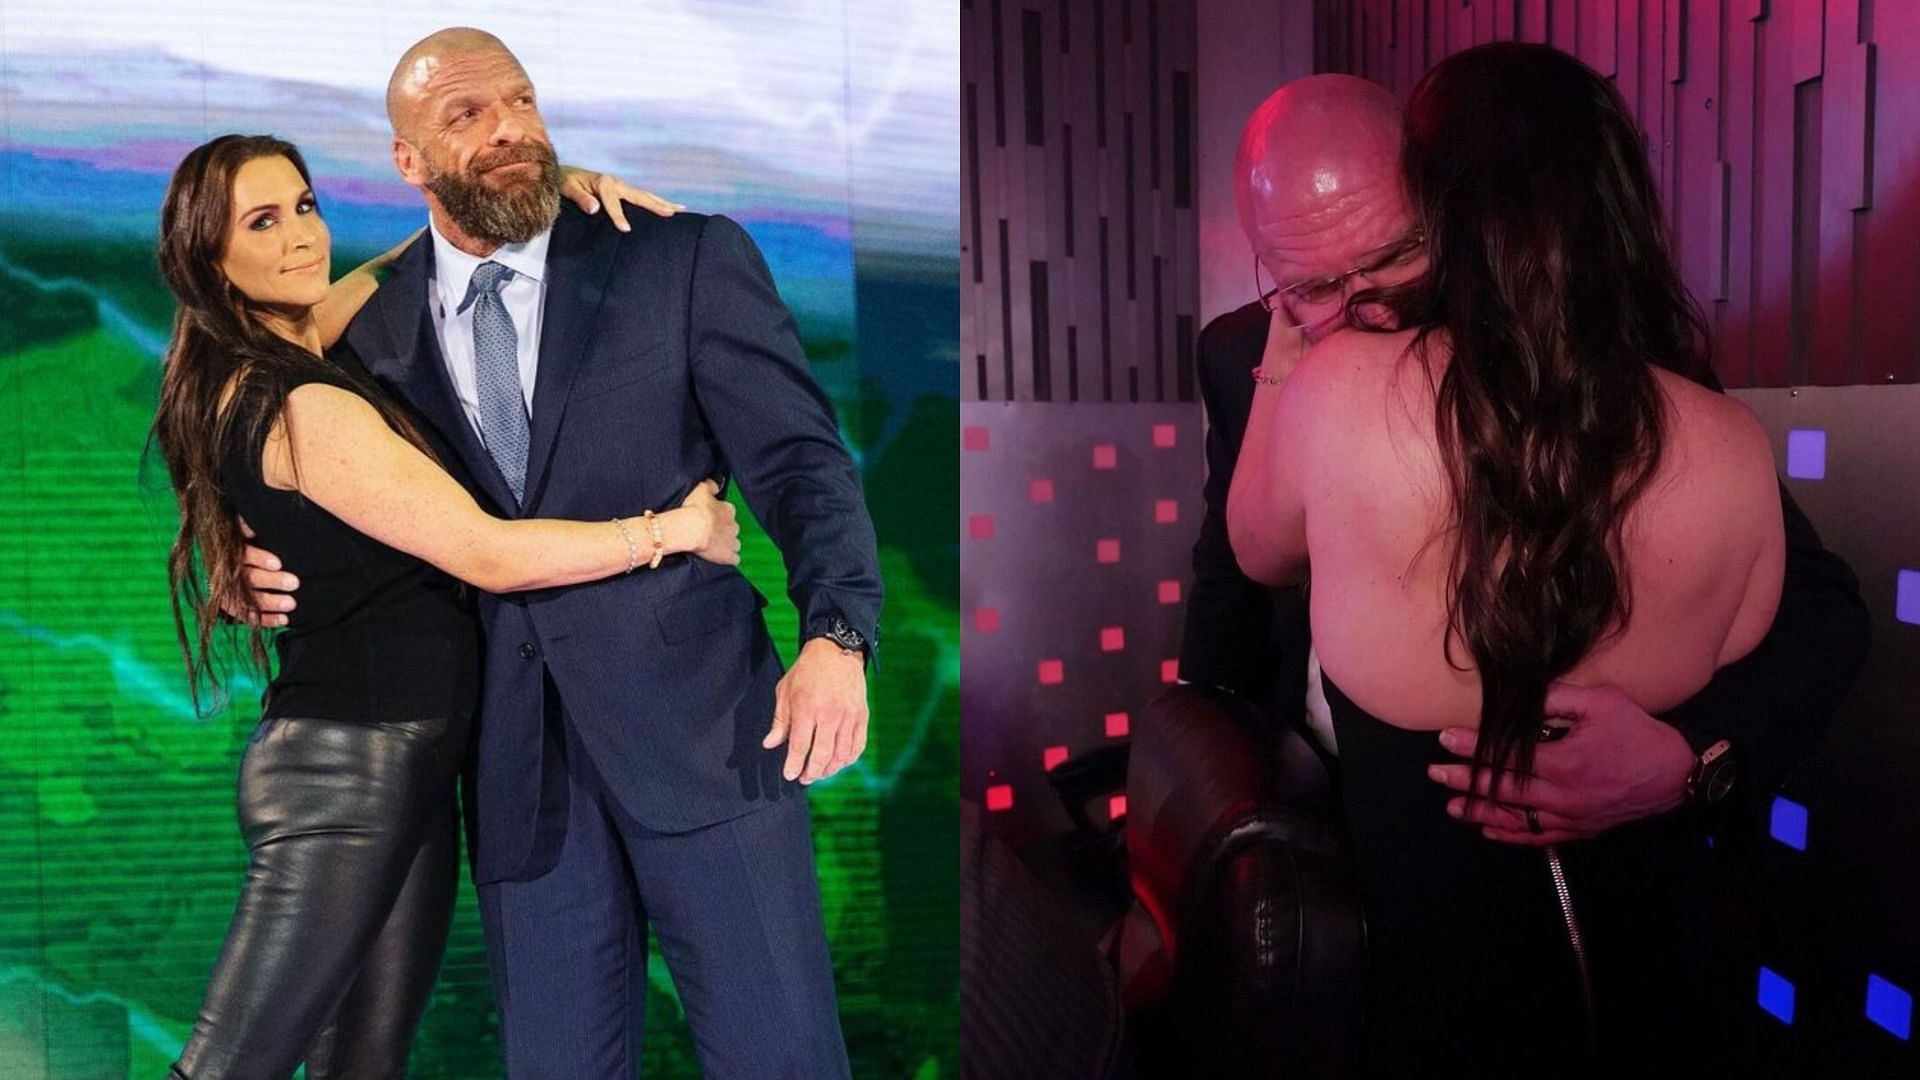 WWE CCO Triple H and Stephanie McMahon have been married since 2003